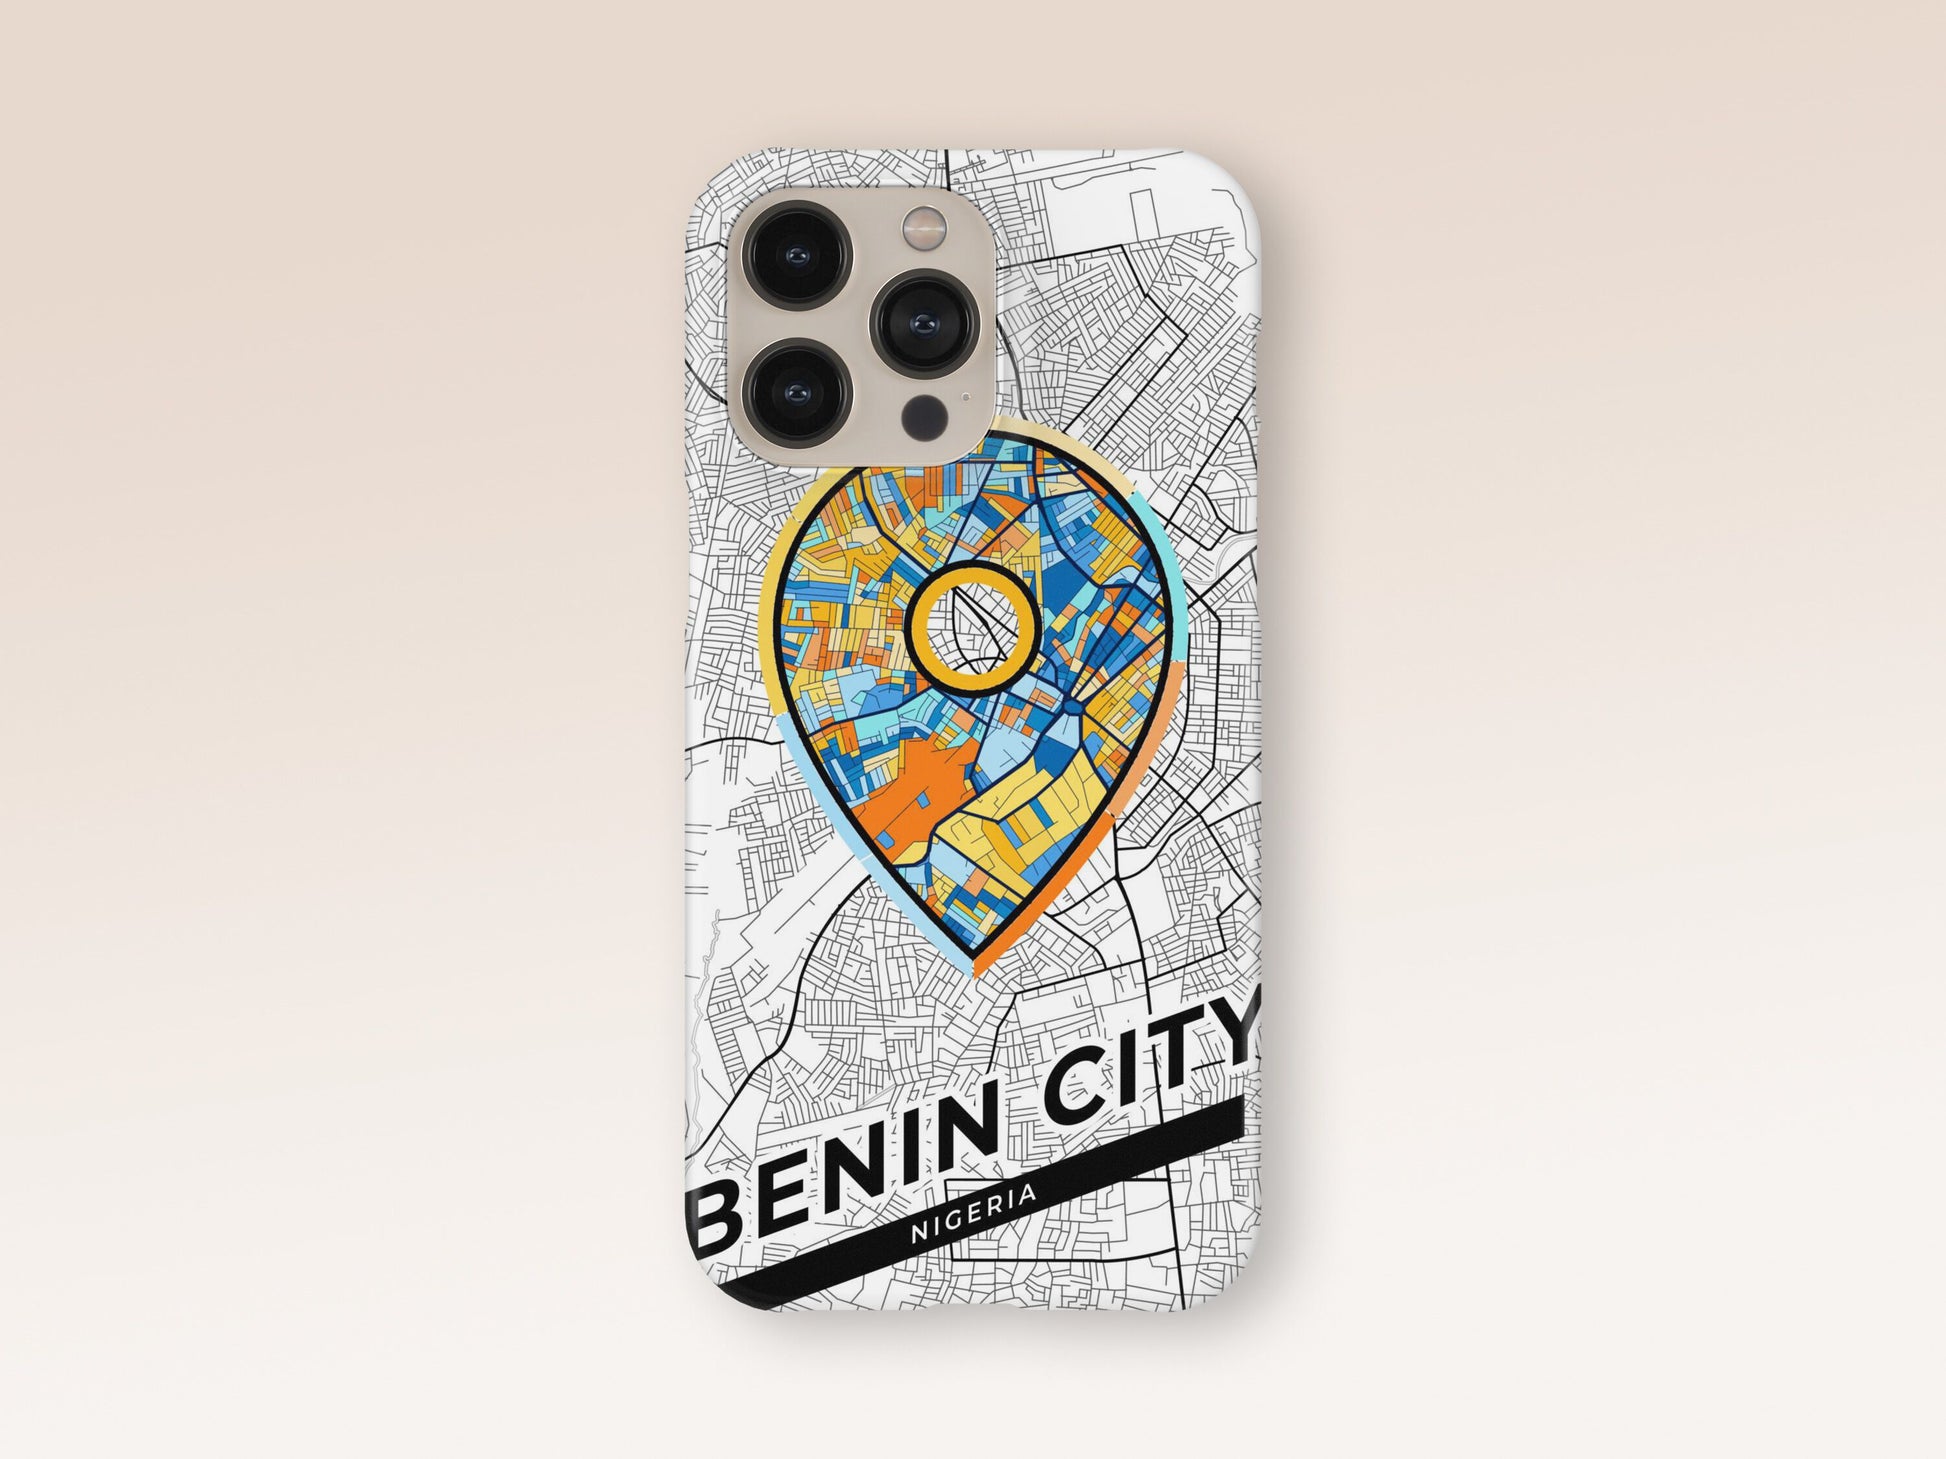 Benin City Nigeria slim phone case with colorful icon. Birthday, wedding or housewarming gift. Couple match cases. 1